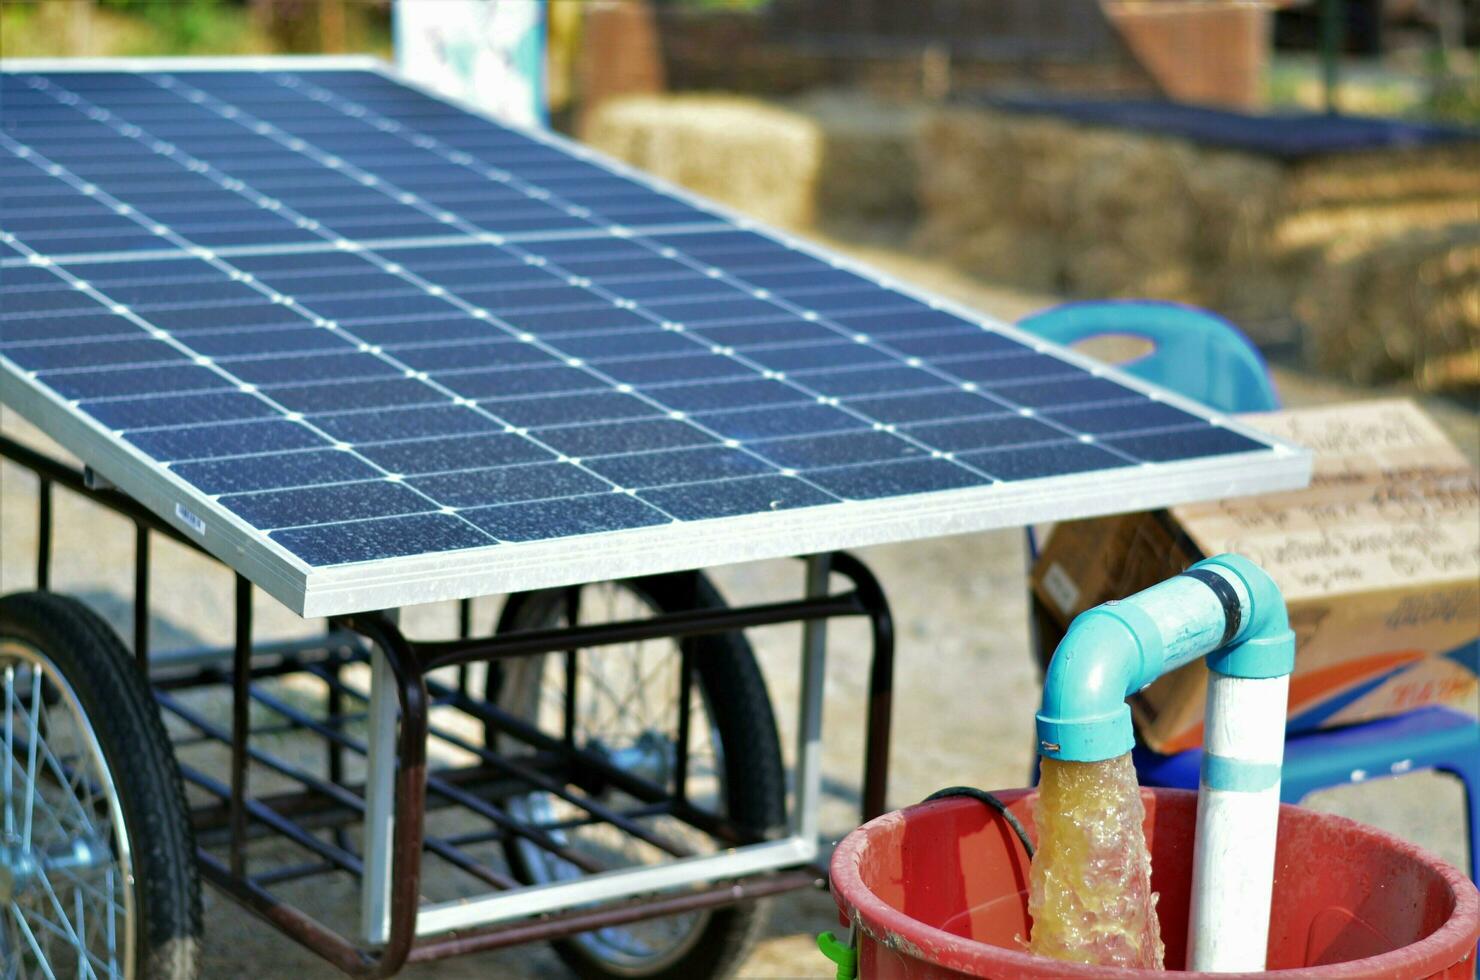 Water pumps and moveable solar panels. Groundwater is pumped with a submersible pump from clean energy or solar energy converted to electric energy on a small agricultural farm. photo